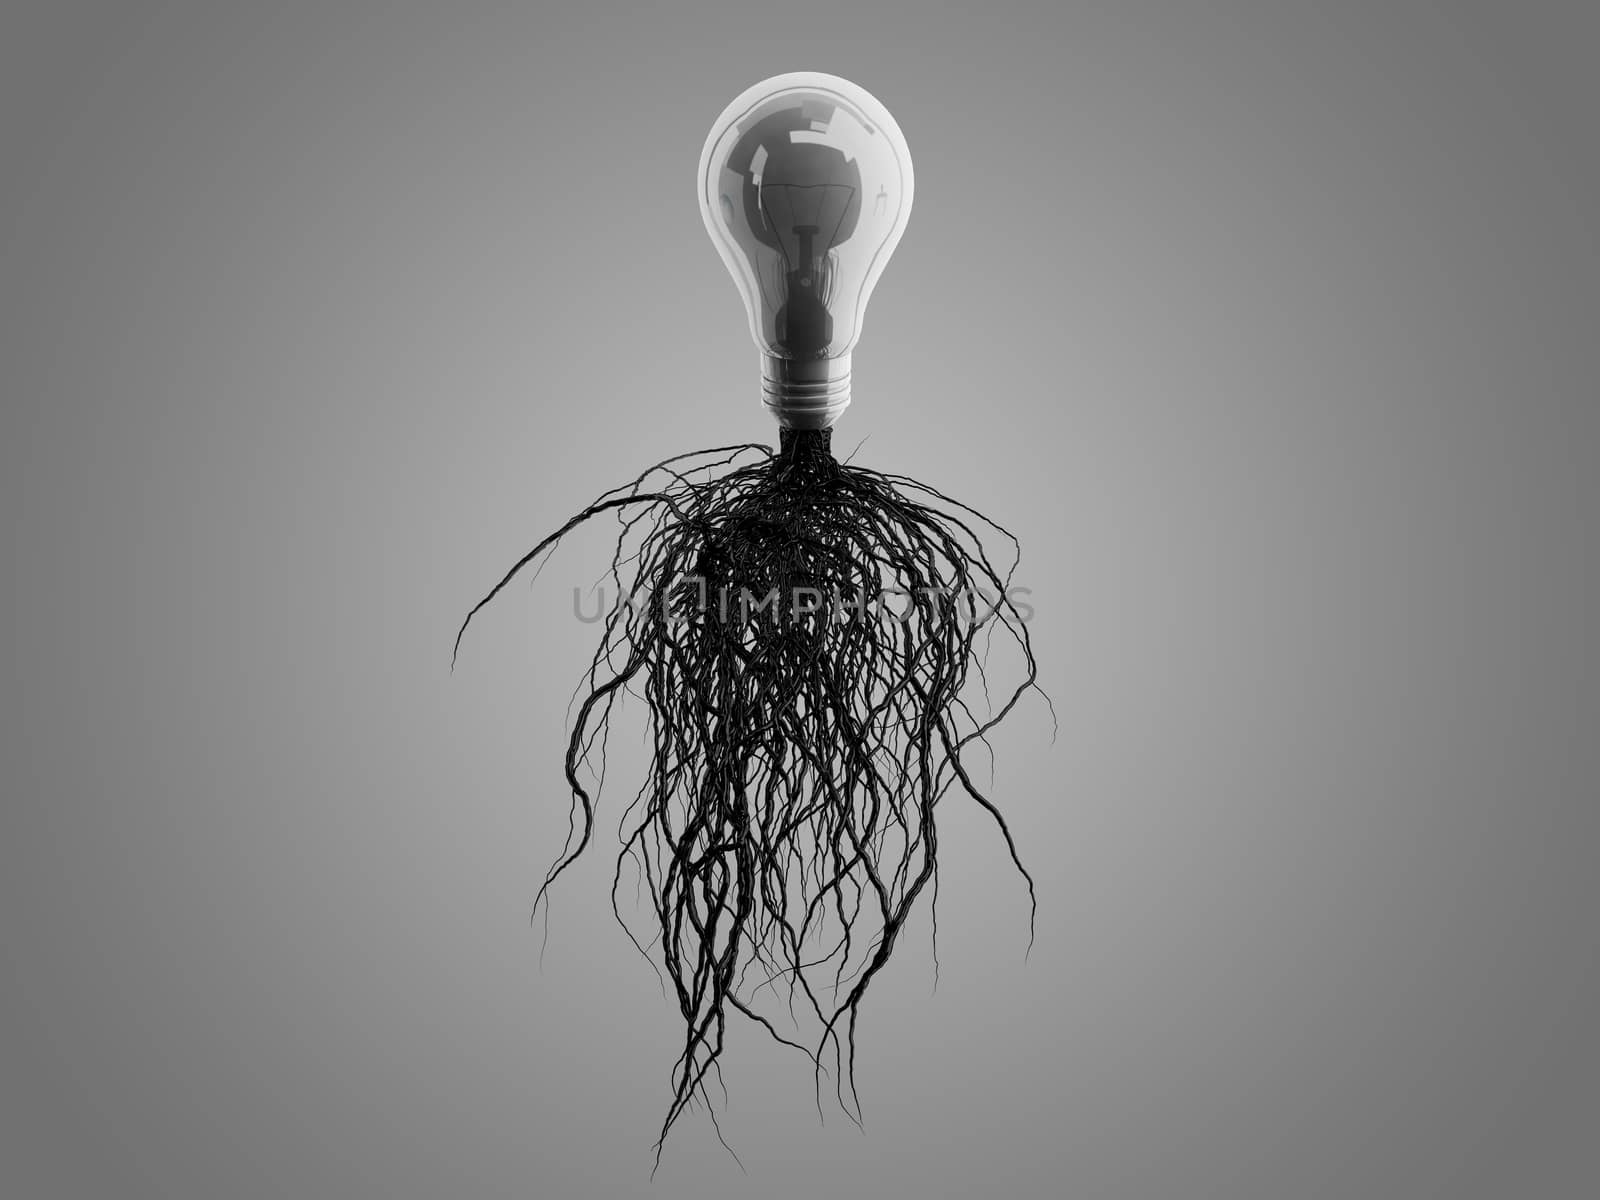 Light bulb with roots and emerged on the icon with roots. by teerawit